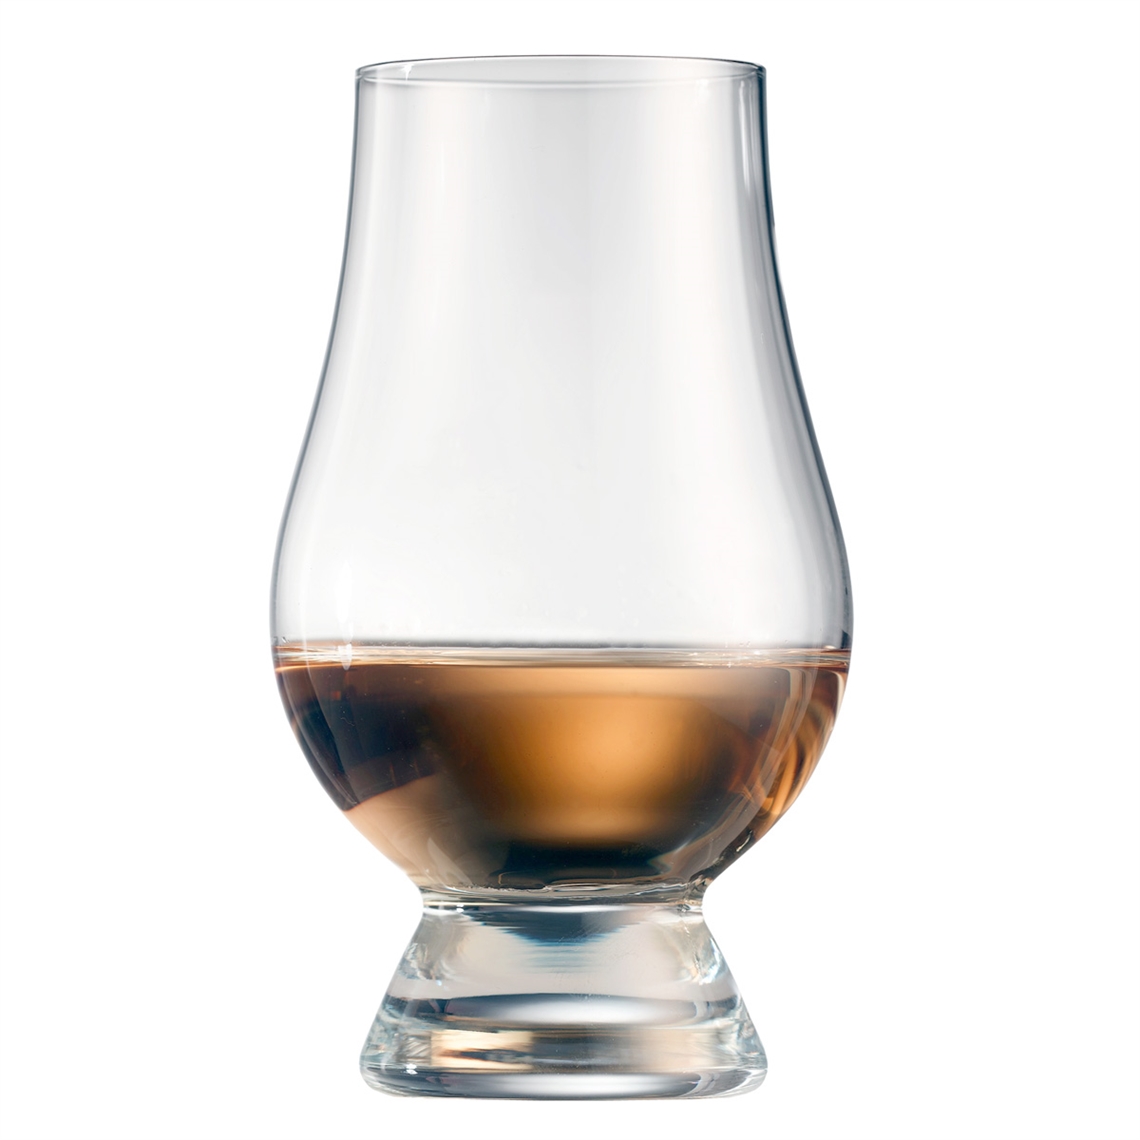 View more chablis wine glasses from our Whisky Glasses range